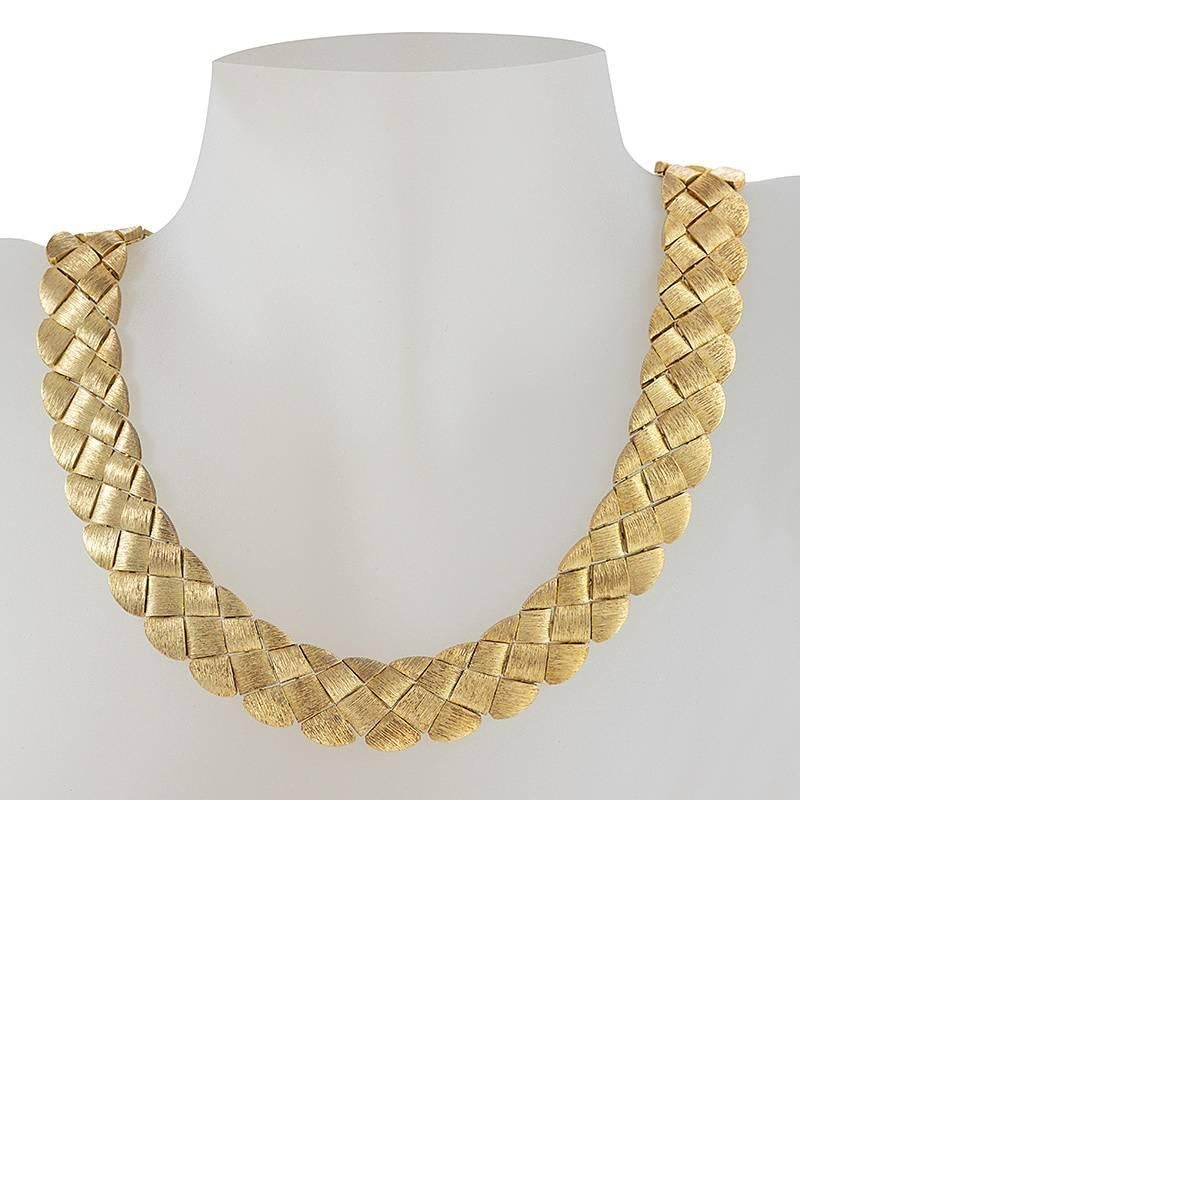 An American Late-20th Century 18 karat gold necklace by Henry Dunay. The highly flexible necklace is composed of a basketweave link pattern with Henry Dunay’s distinctive surface texturing and unique gold color. Unique Dunay slide clasp. Circa